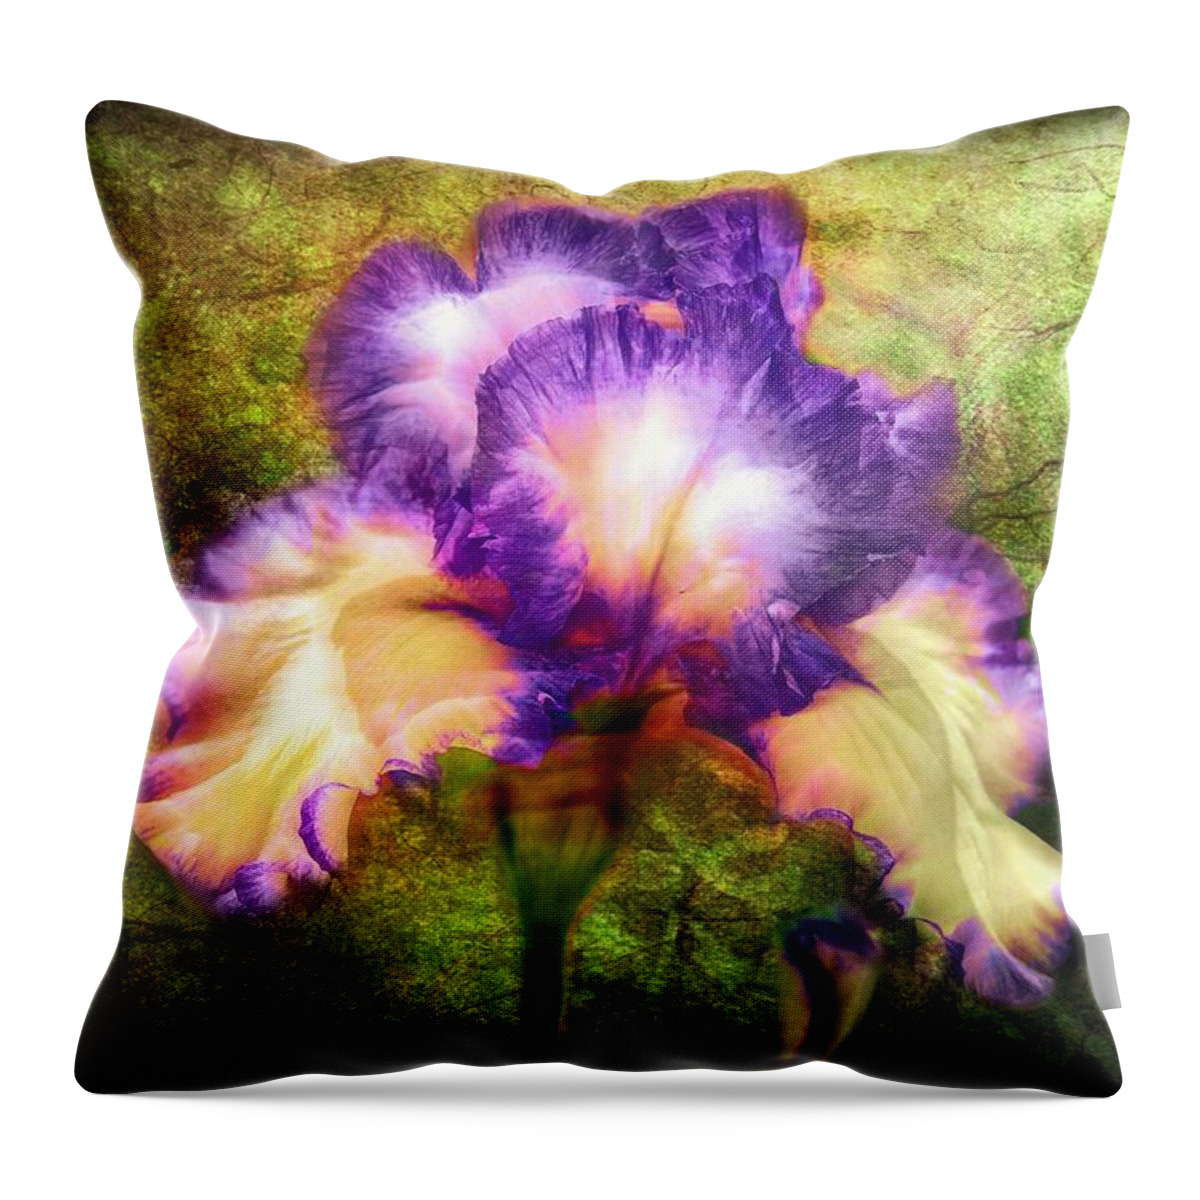 Iris Throw Pillow featuring the painting Iris Beauty by Lilia D